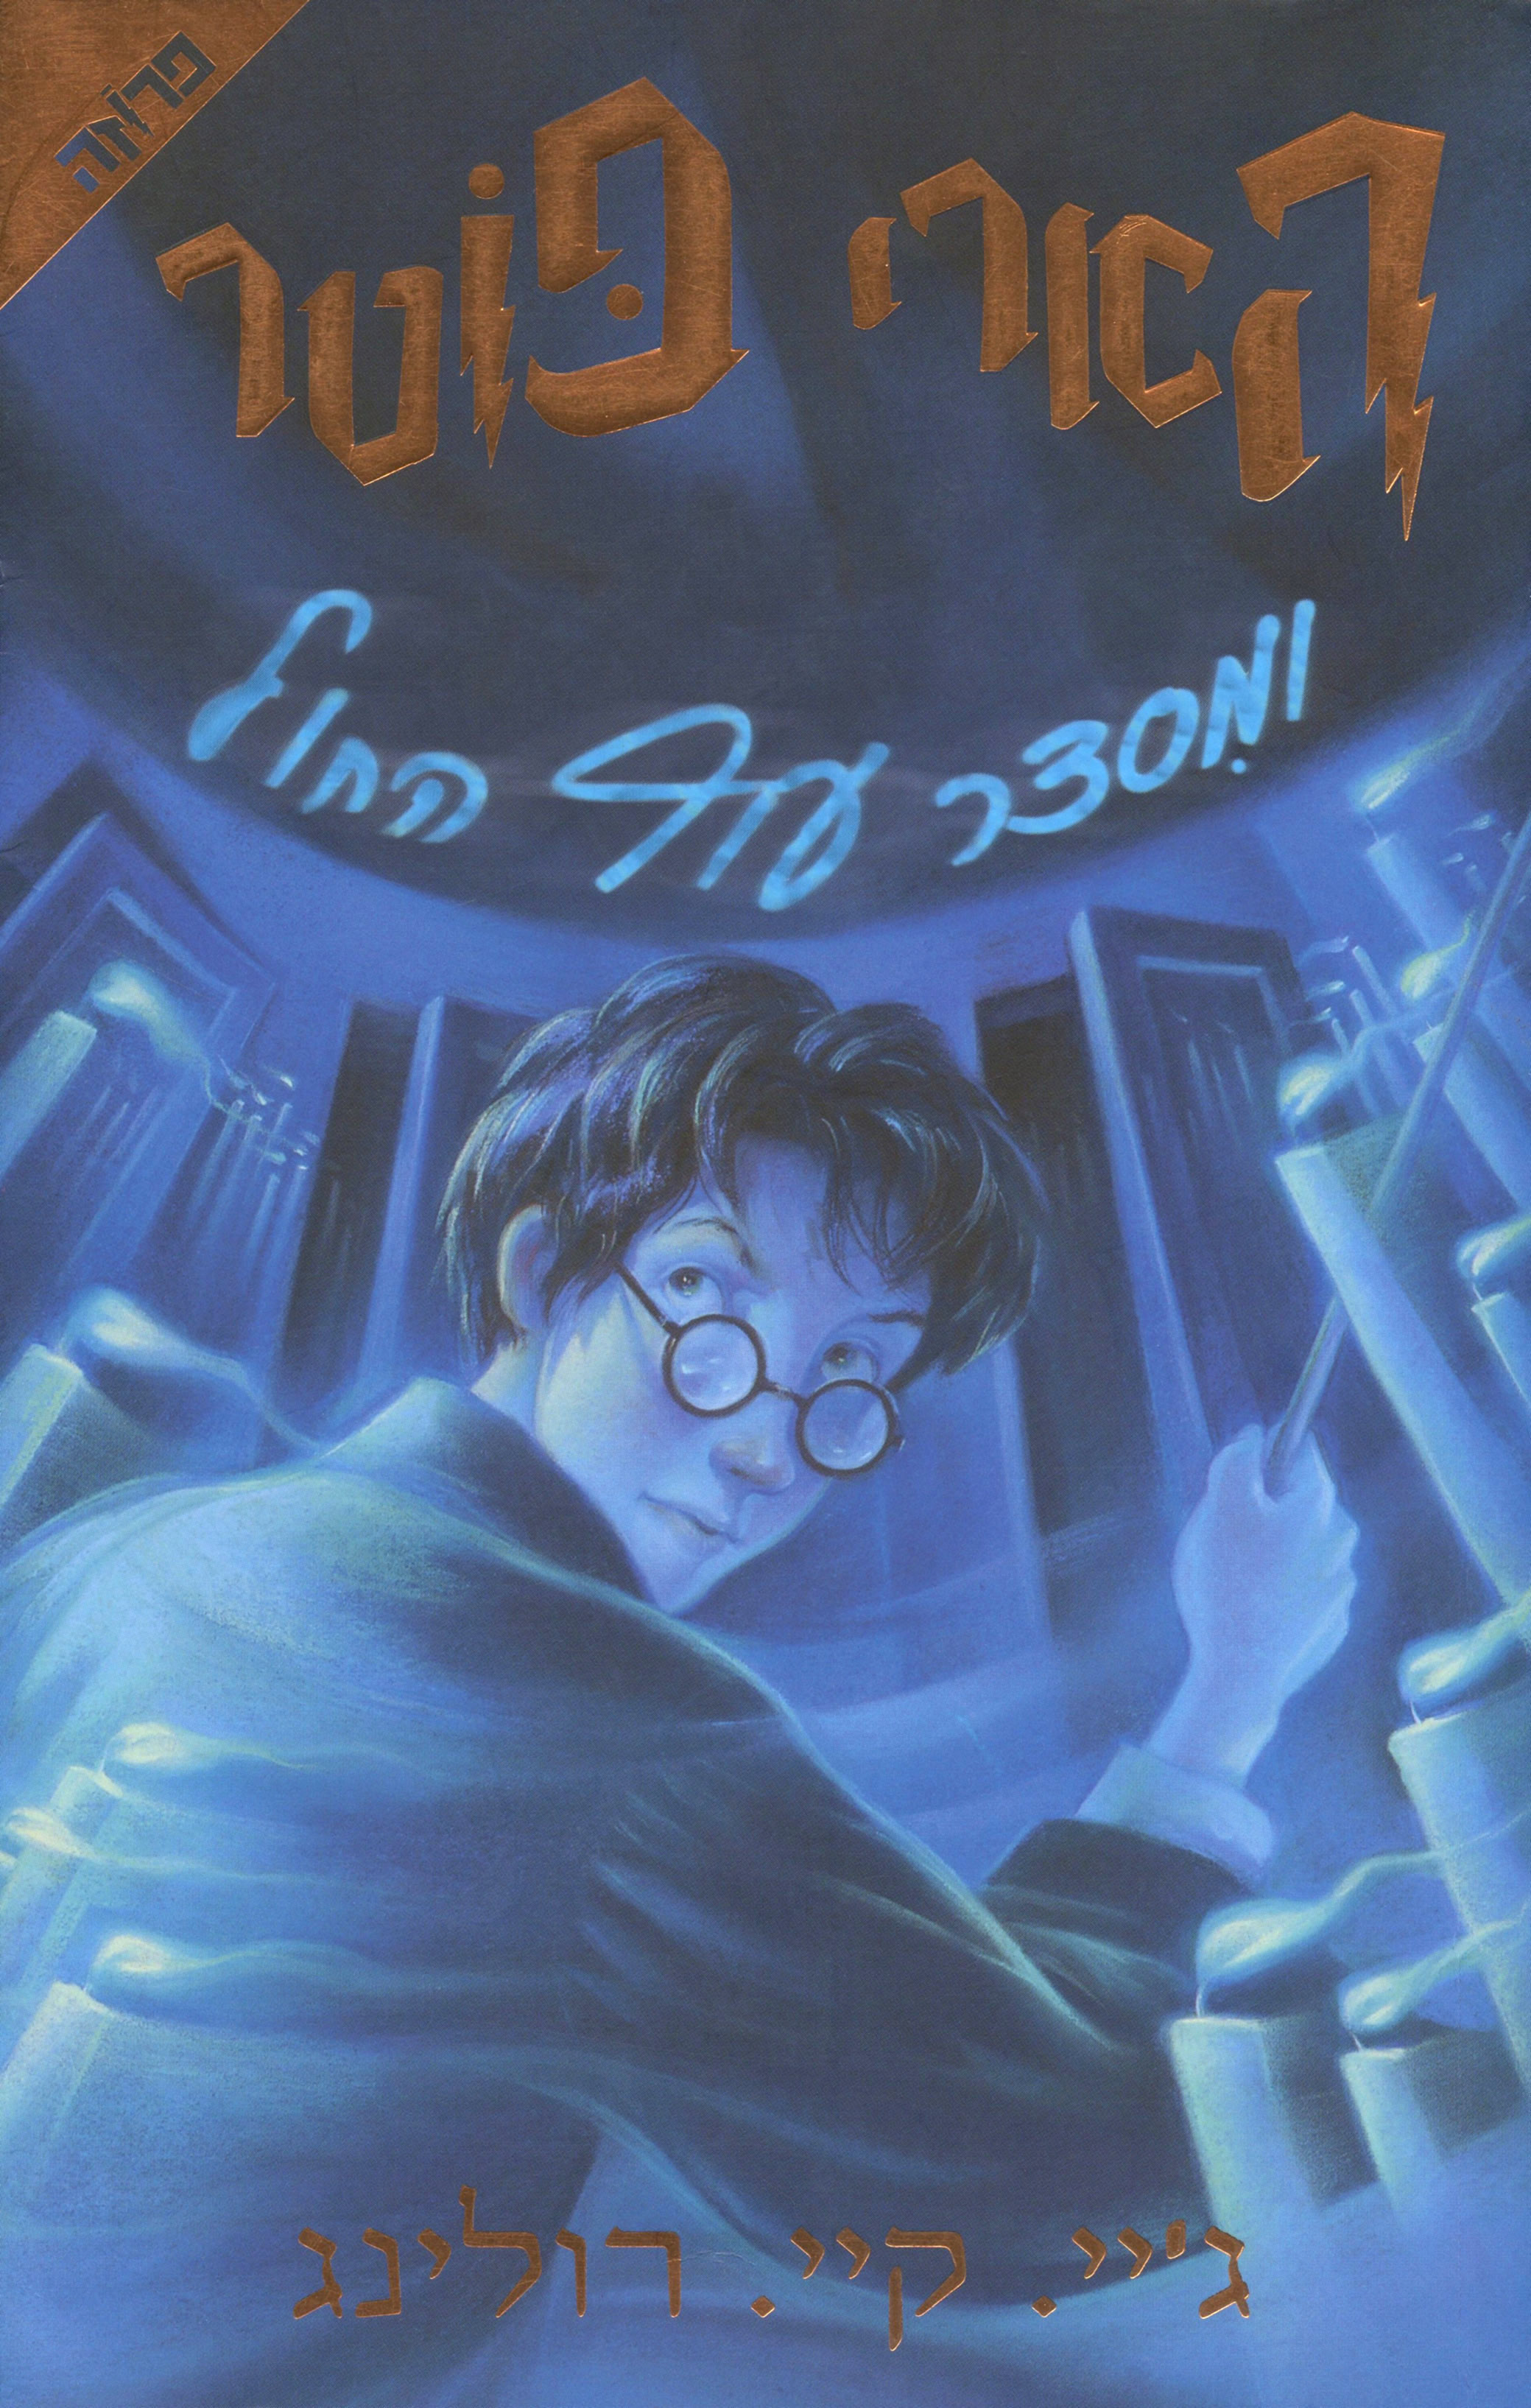 fifth harry potter book